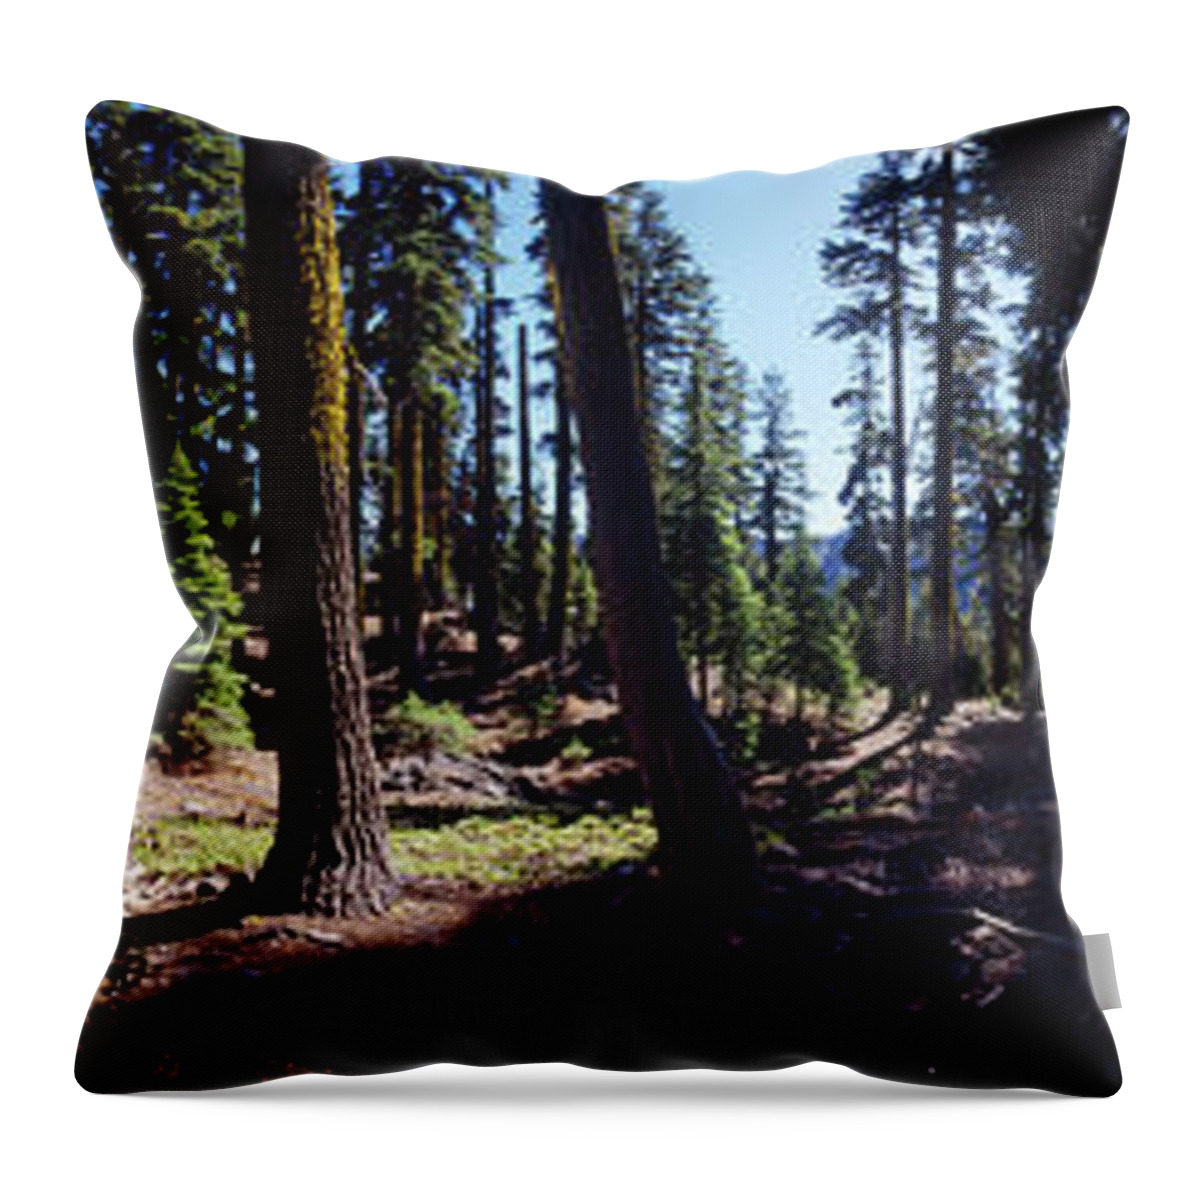 Photography Throw Pillow featuring the photograph Trees In A Forest, Wizard Island by Panoramic Images